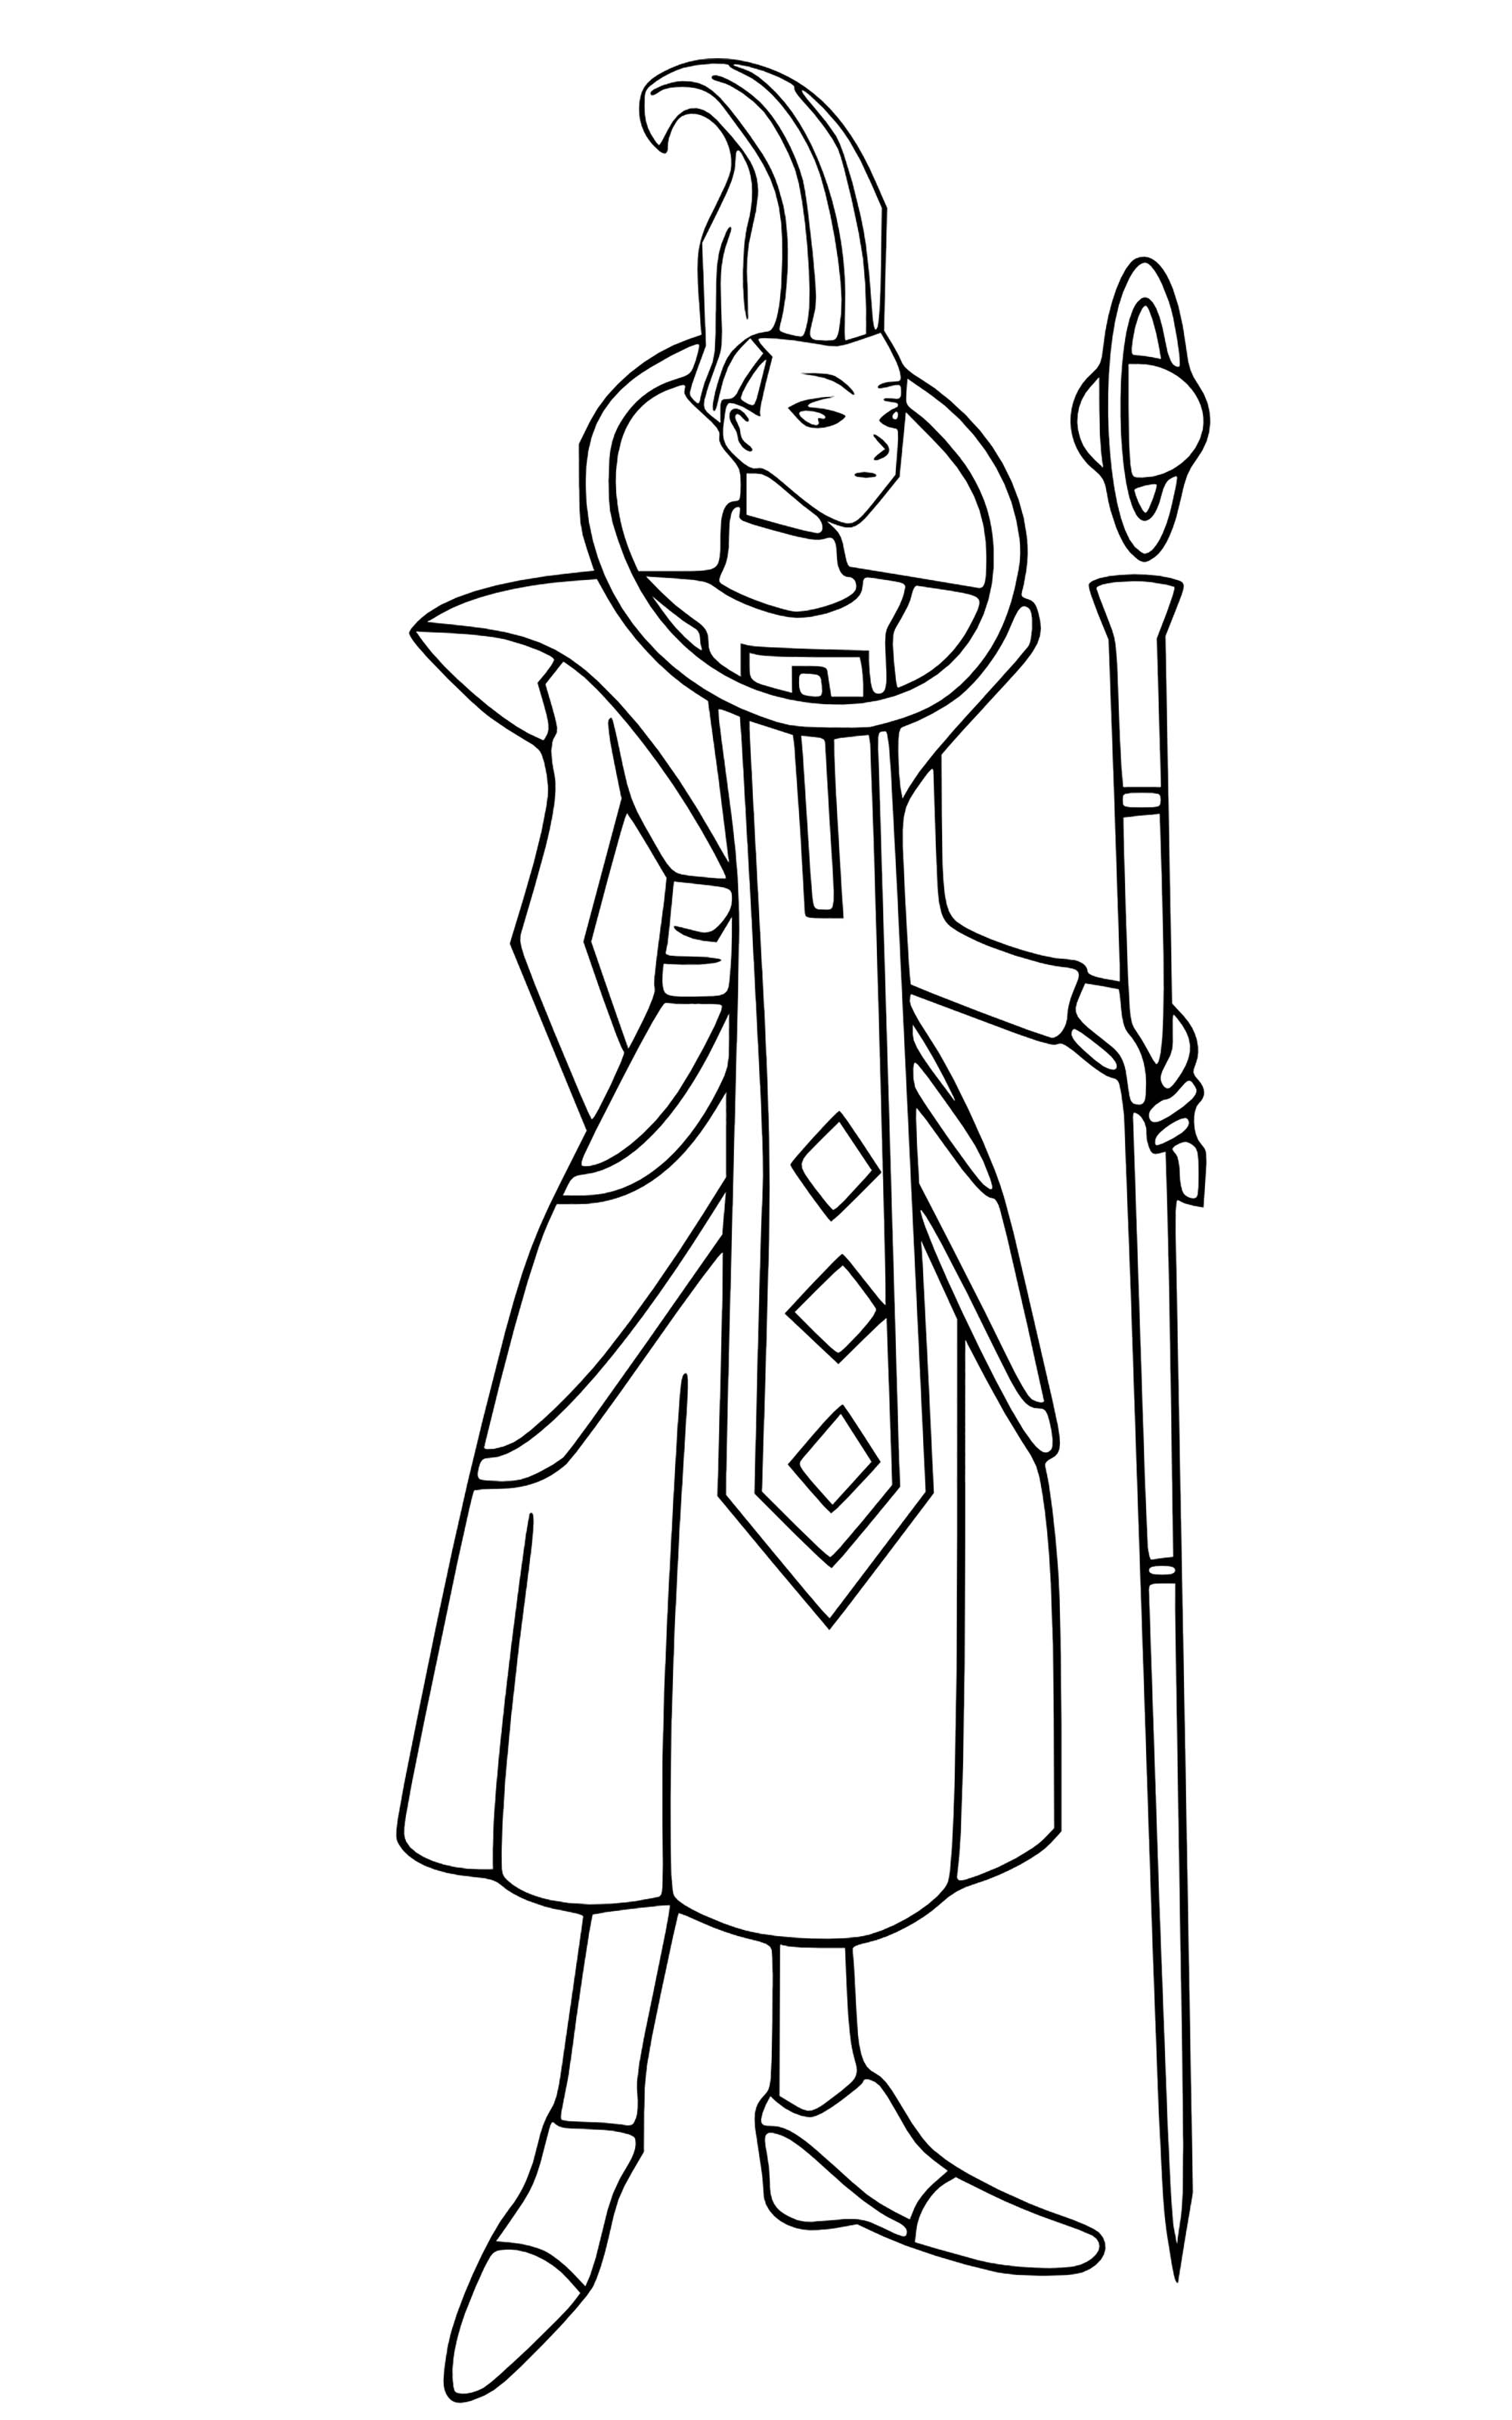 Whis Dragon Ball Z Kids Coloring Pages